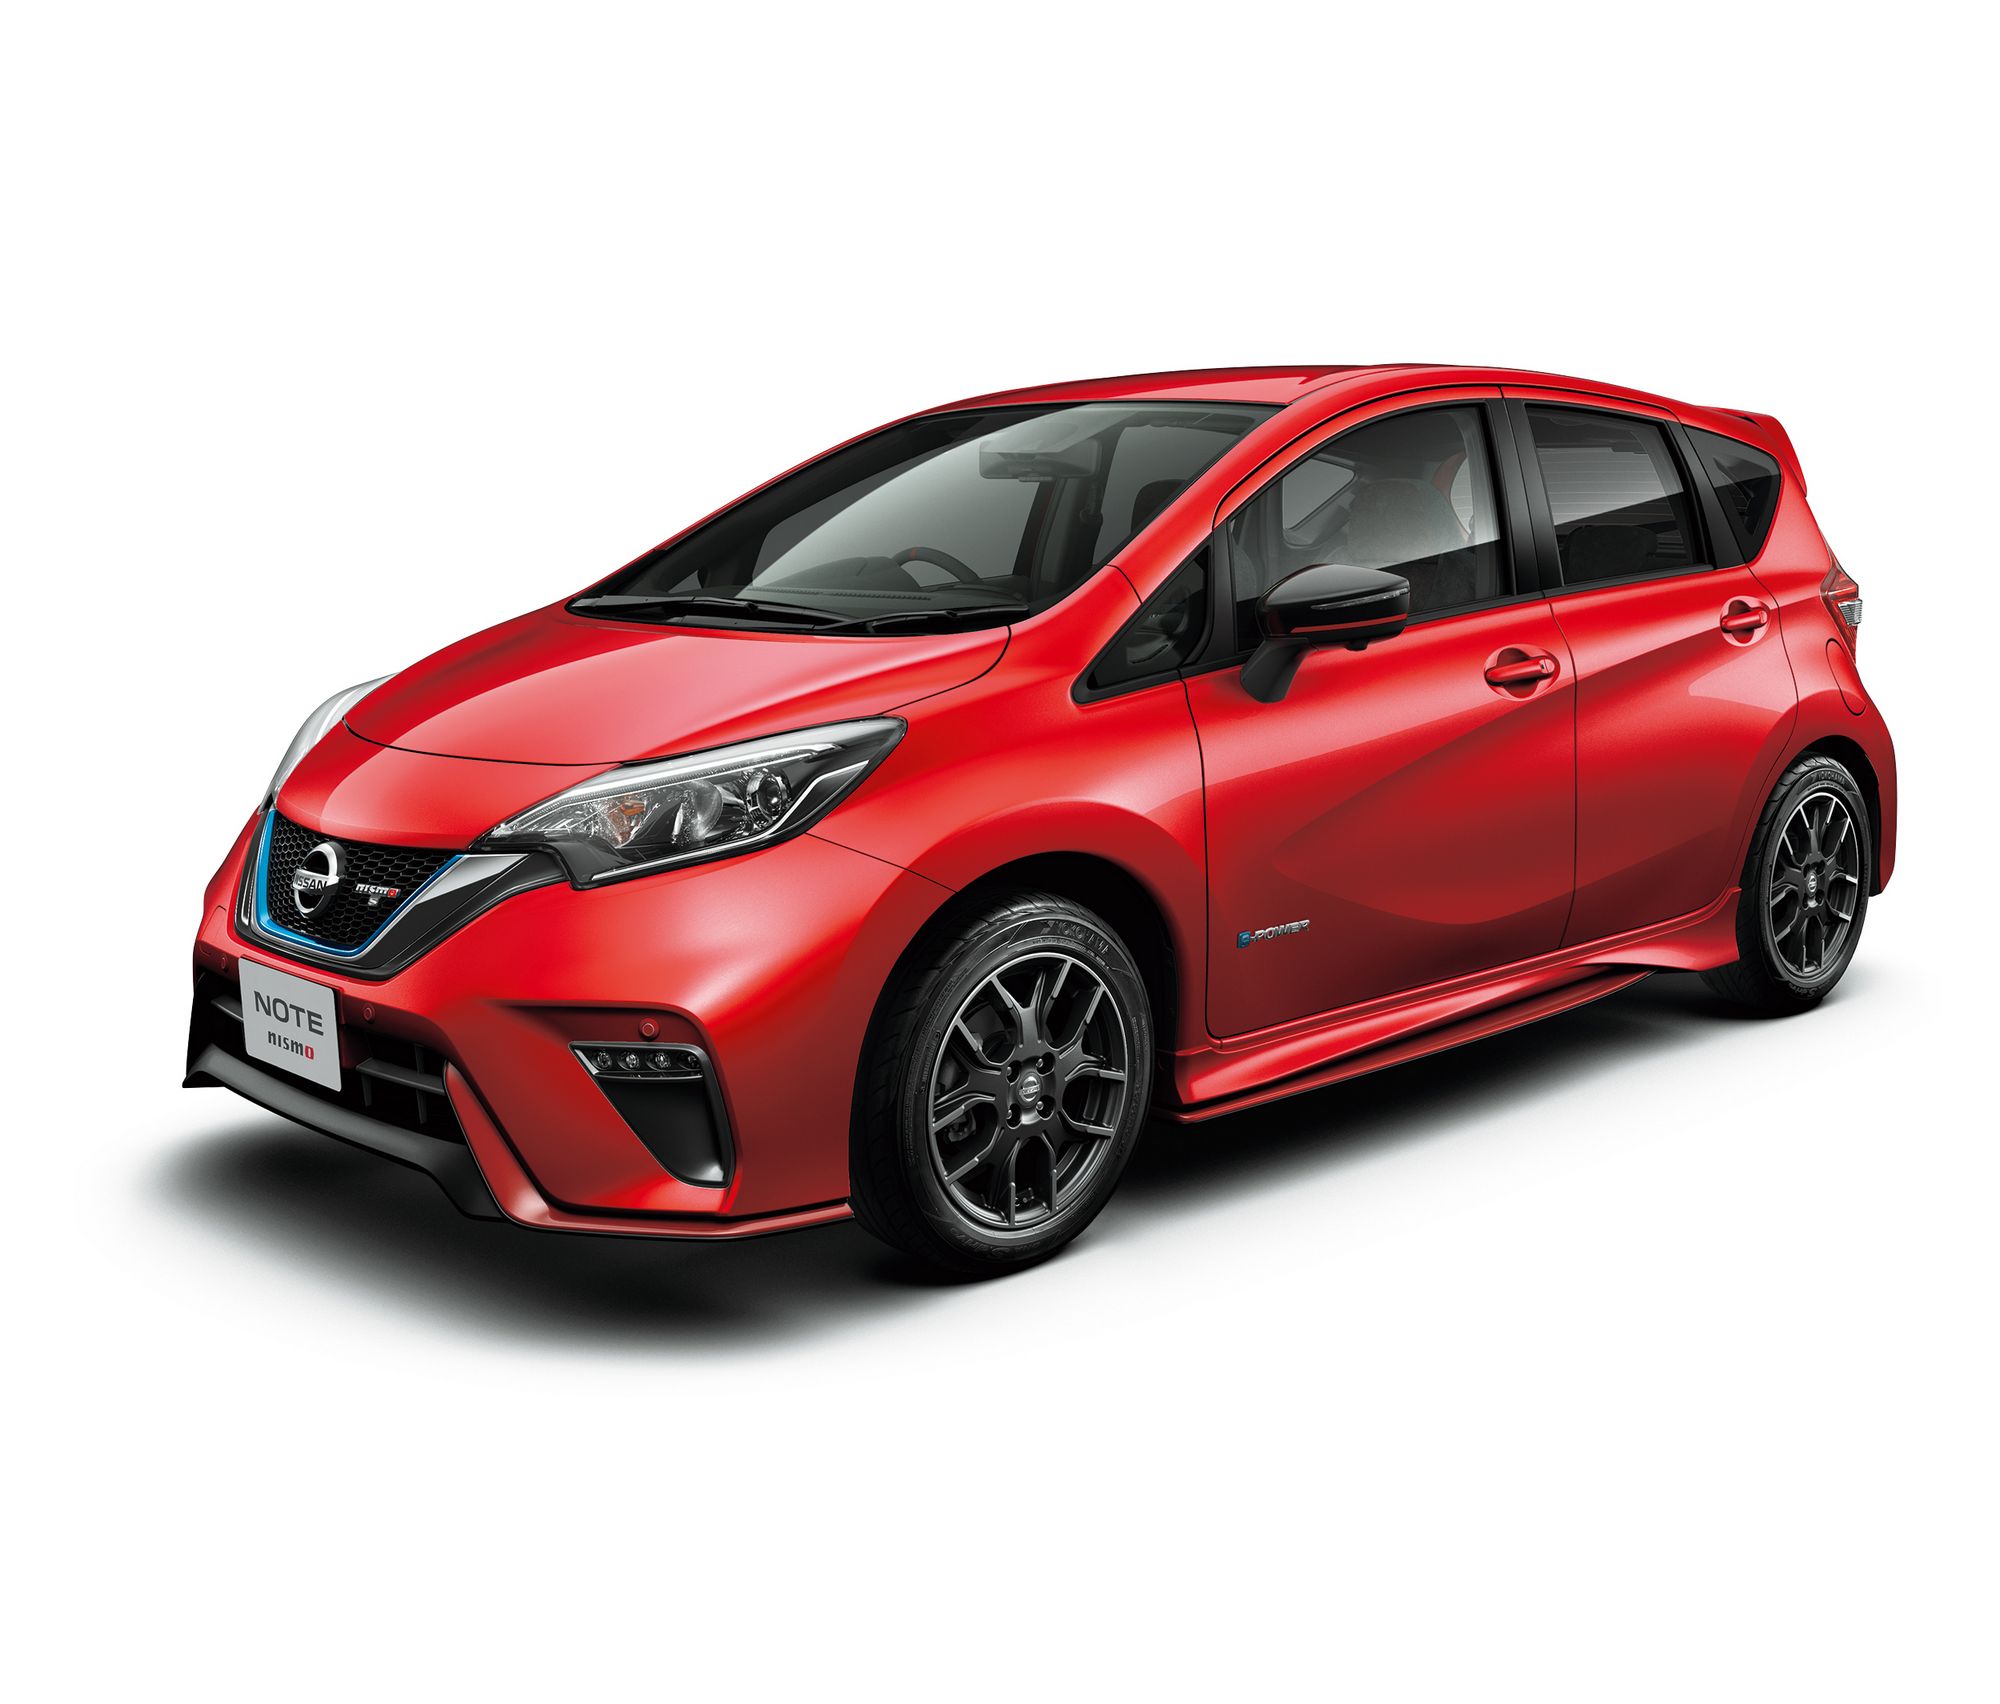 Nissan note 2018. Nissan Note e-Power Nismo. Nissan Note e-Power 2019. Nissan Note e-Power 2018. Nissan Note e Power 2018 Nismo.